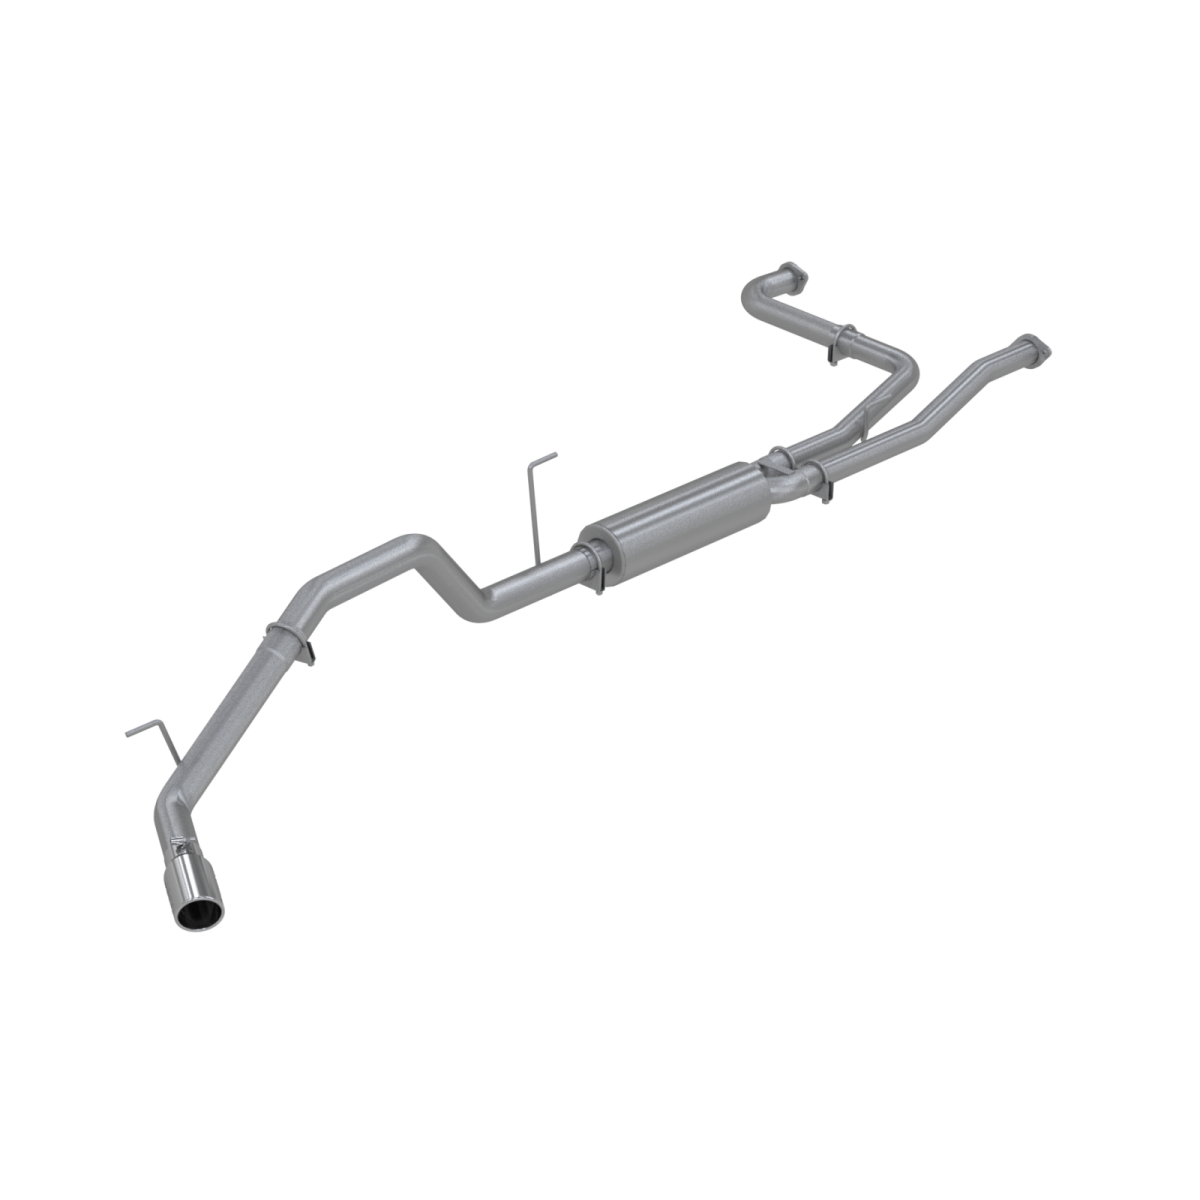 MBRP - MBRP Cat Back Exhaust System Single Side Aluminized Steel For 07-15 Nissan Titan 5.6L, Extended Cab/Crew Cab S5404AL